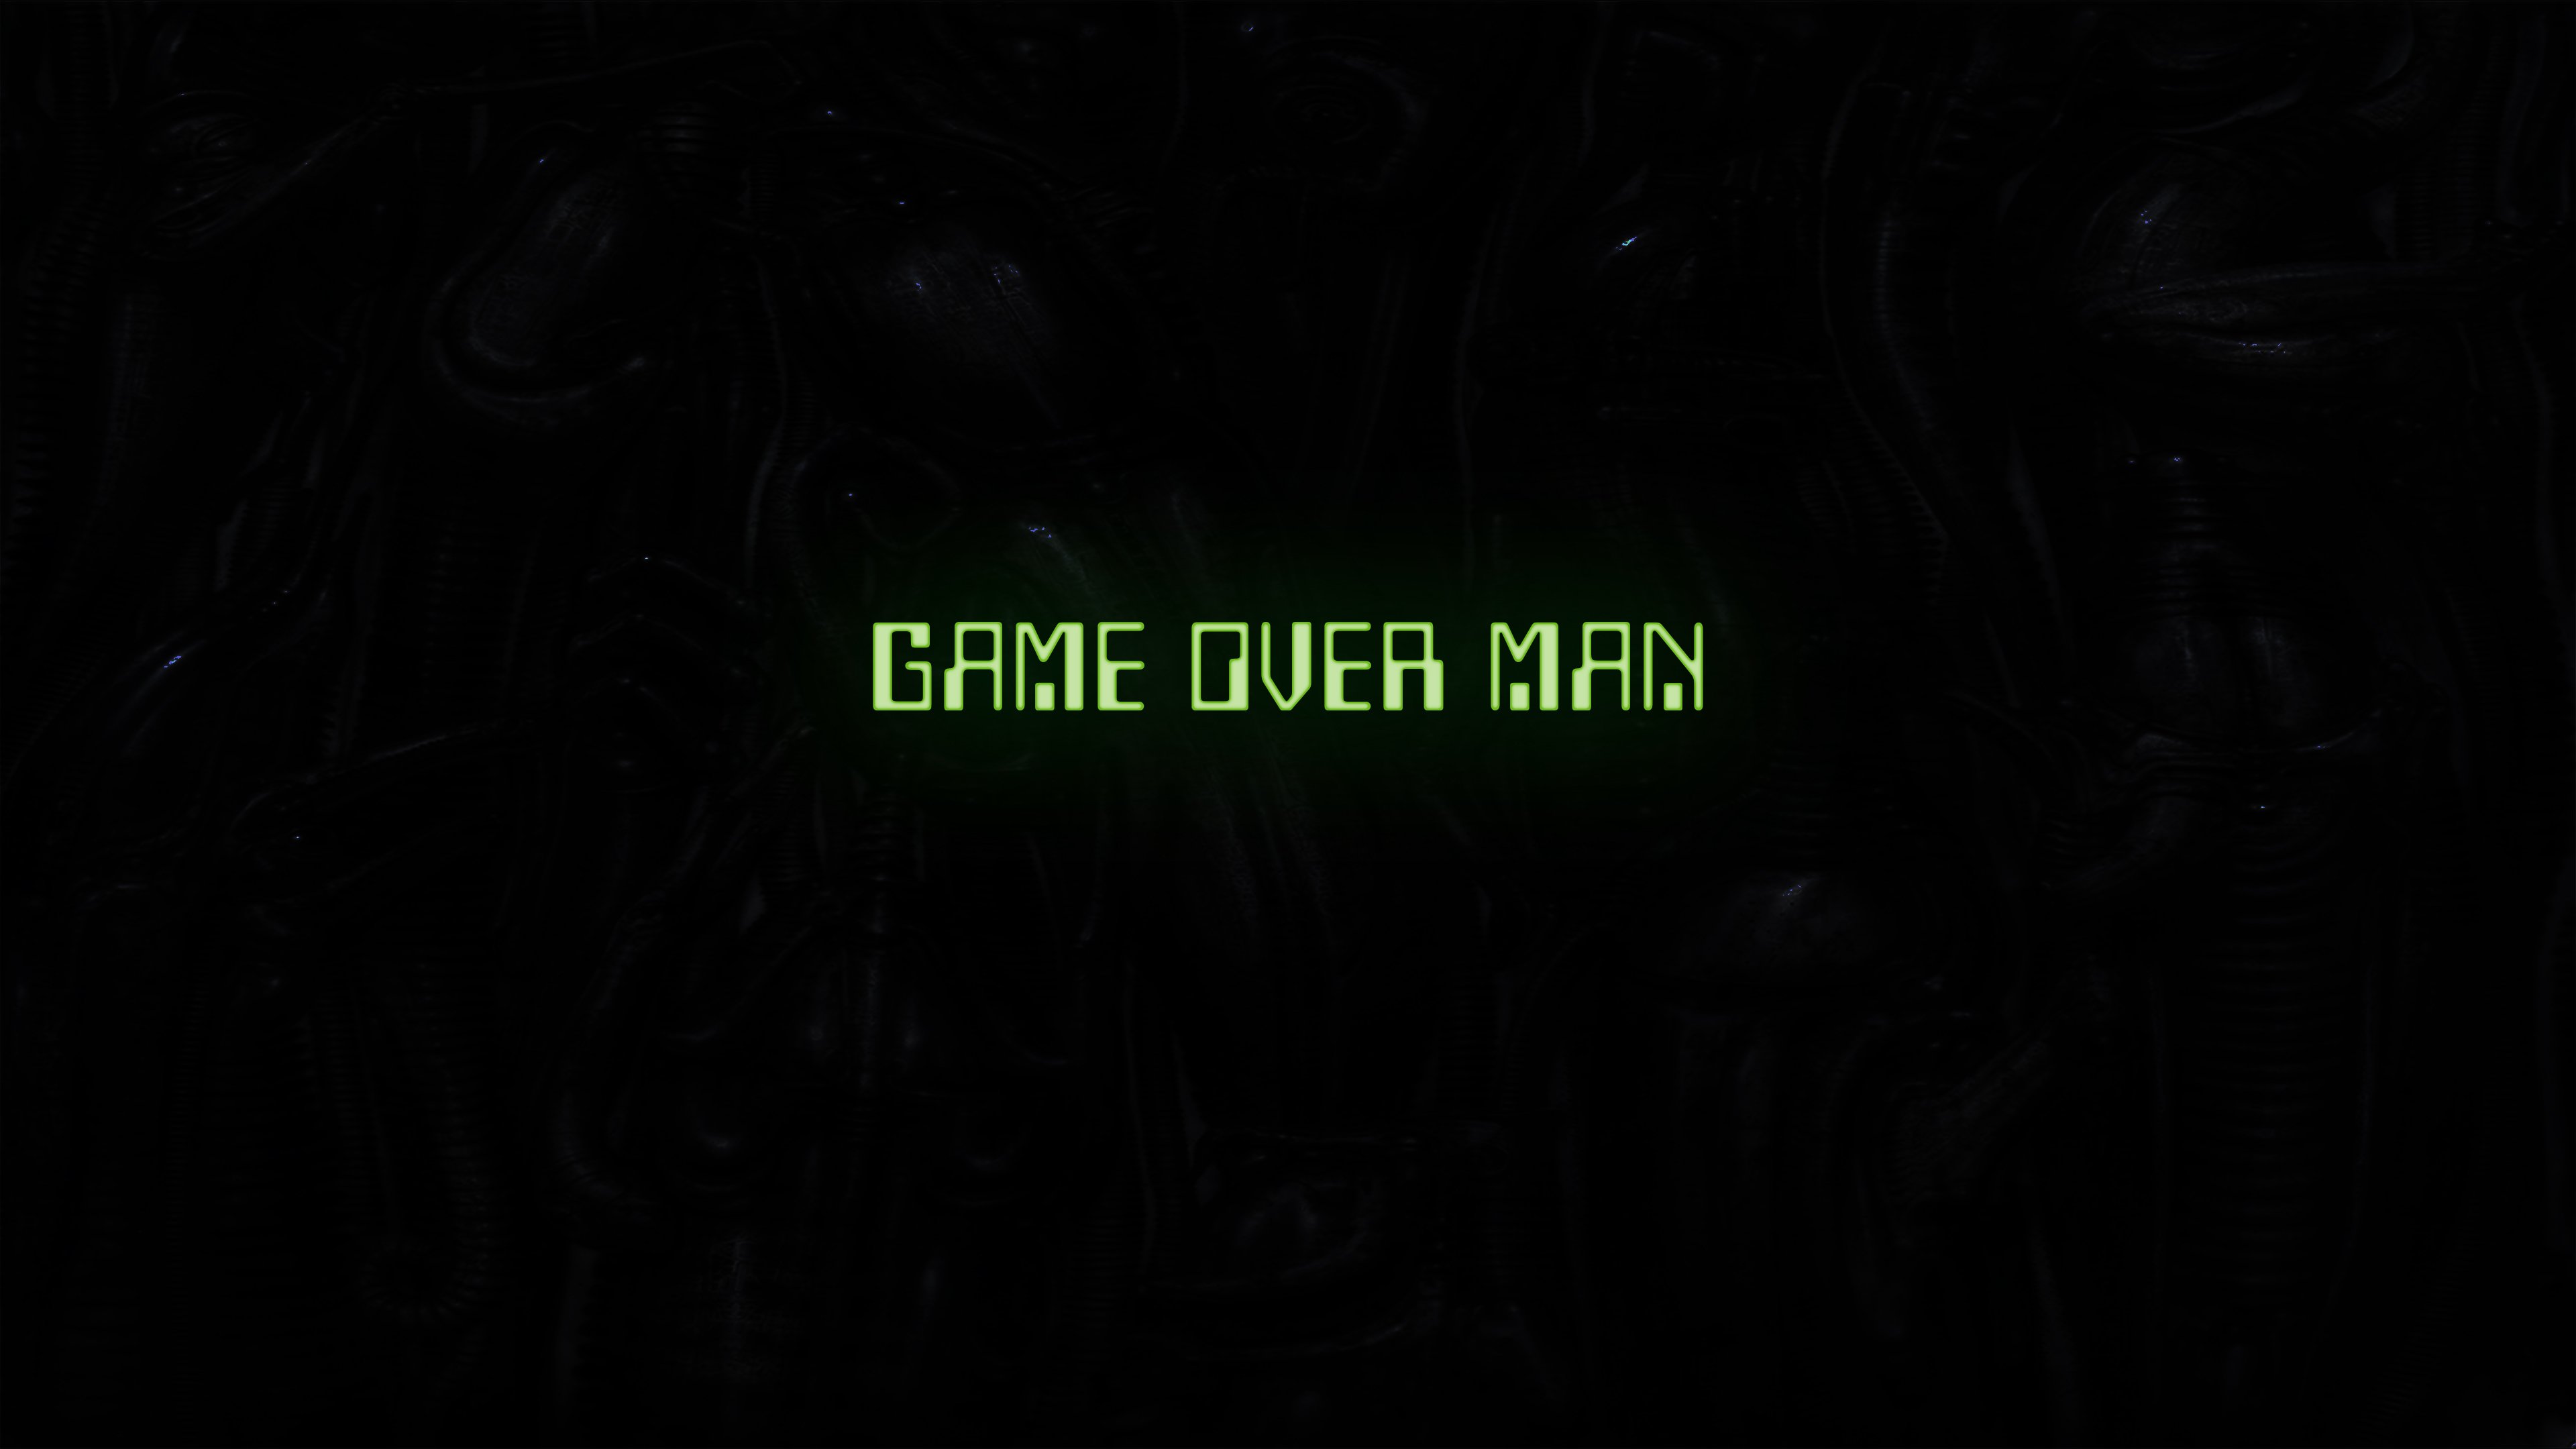 I the game have won. Game over. Фон гейм овер. Обои game over. Надпись game over.